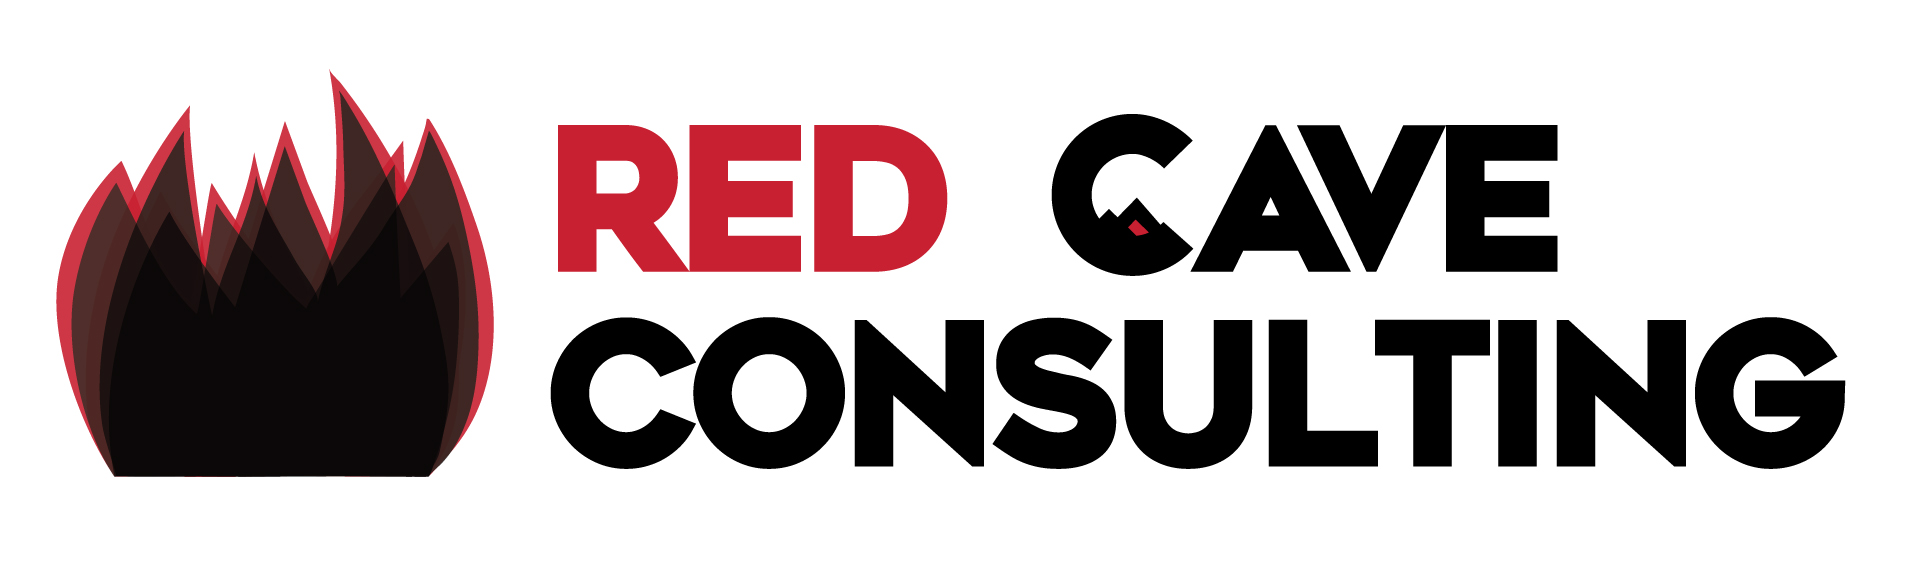 Red Cave Law Firm Consulting